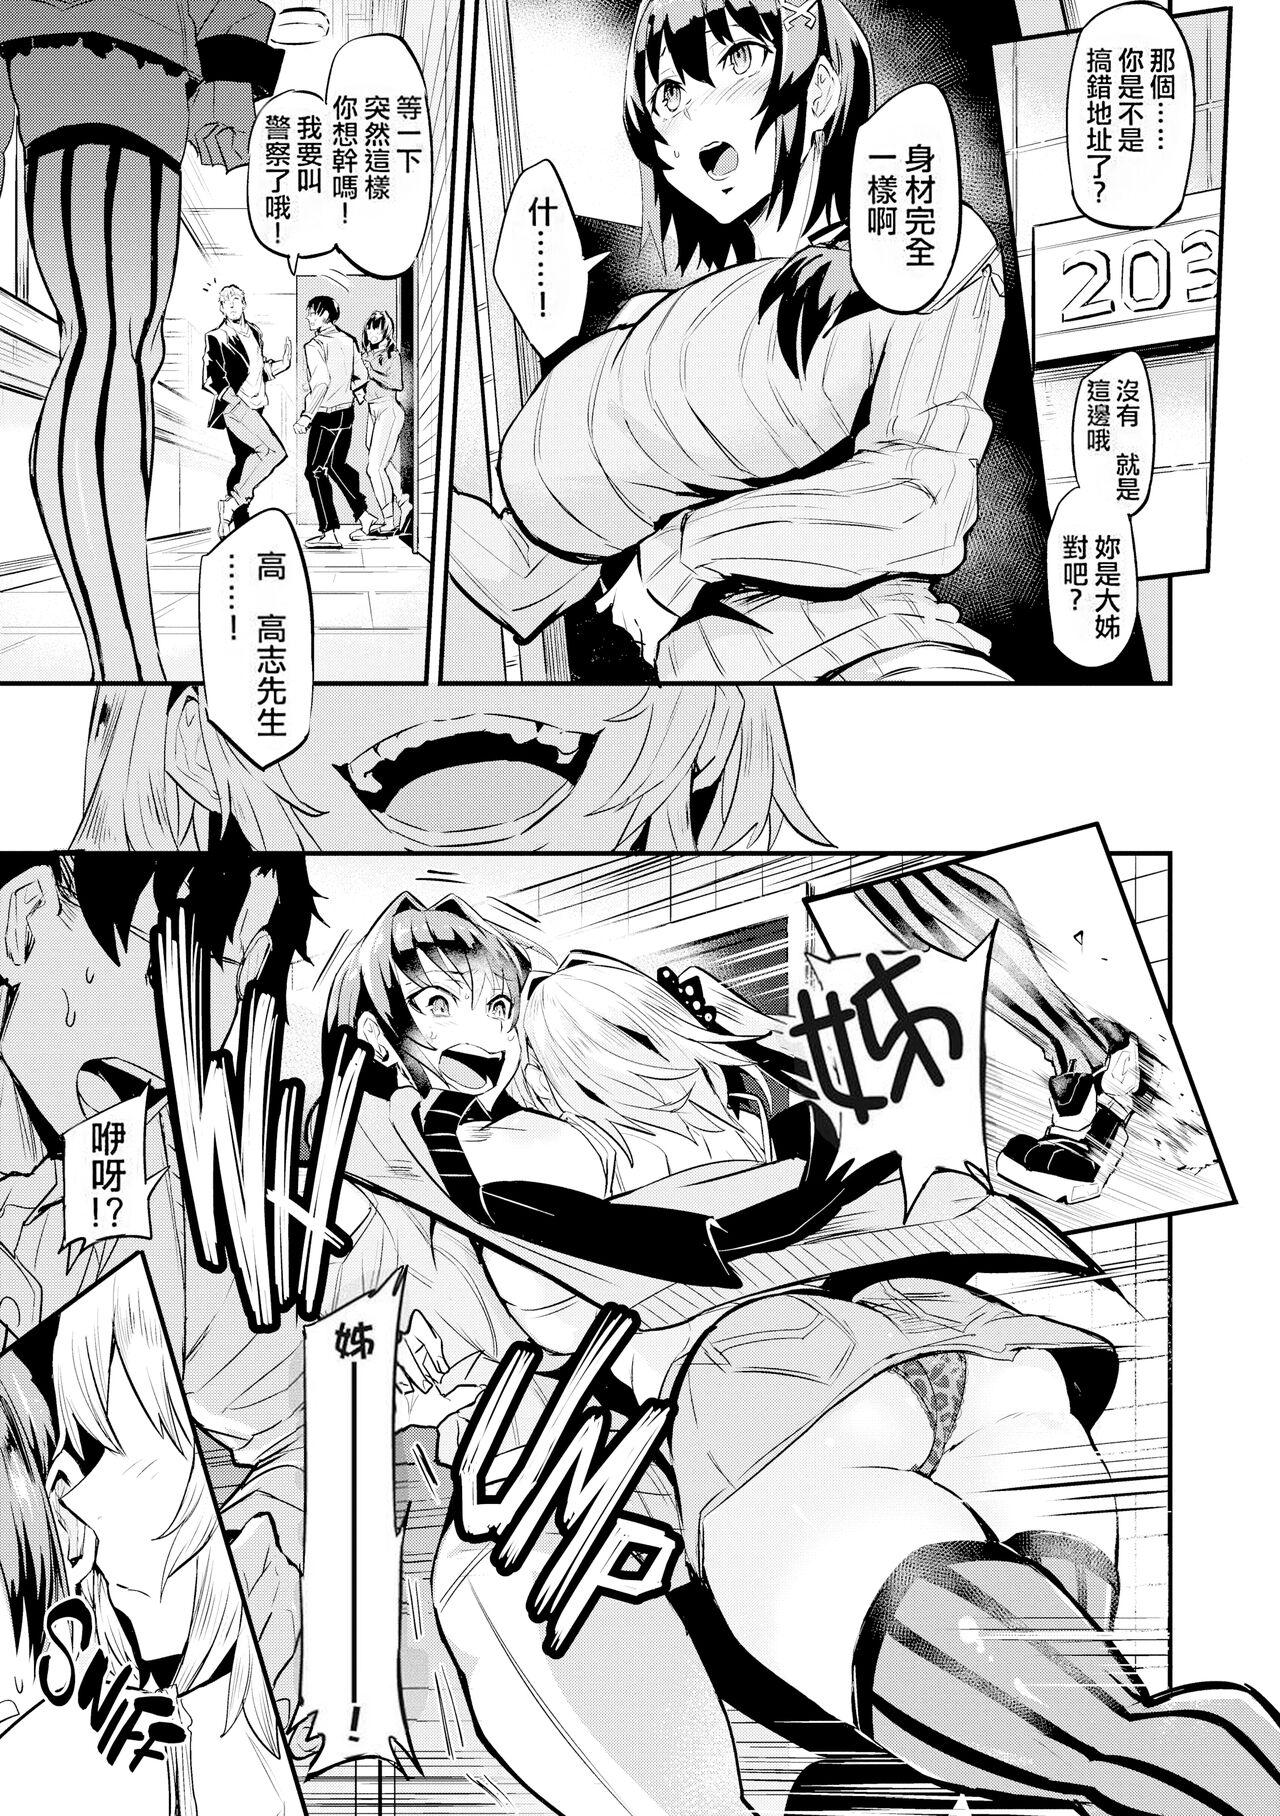 Oral Hitorijime - First Come First Served Coeds - Page 8